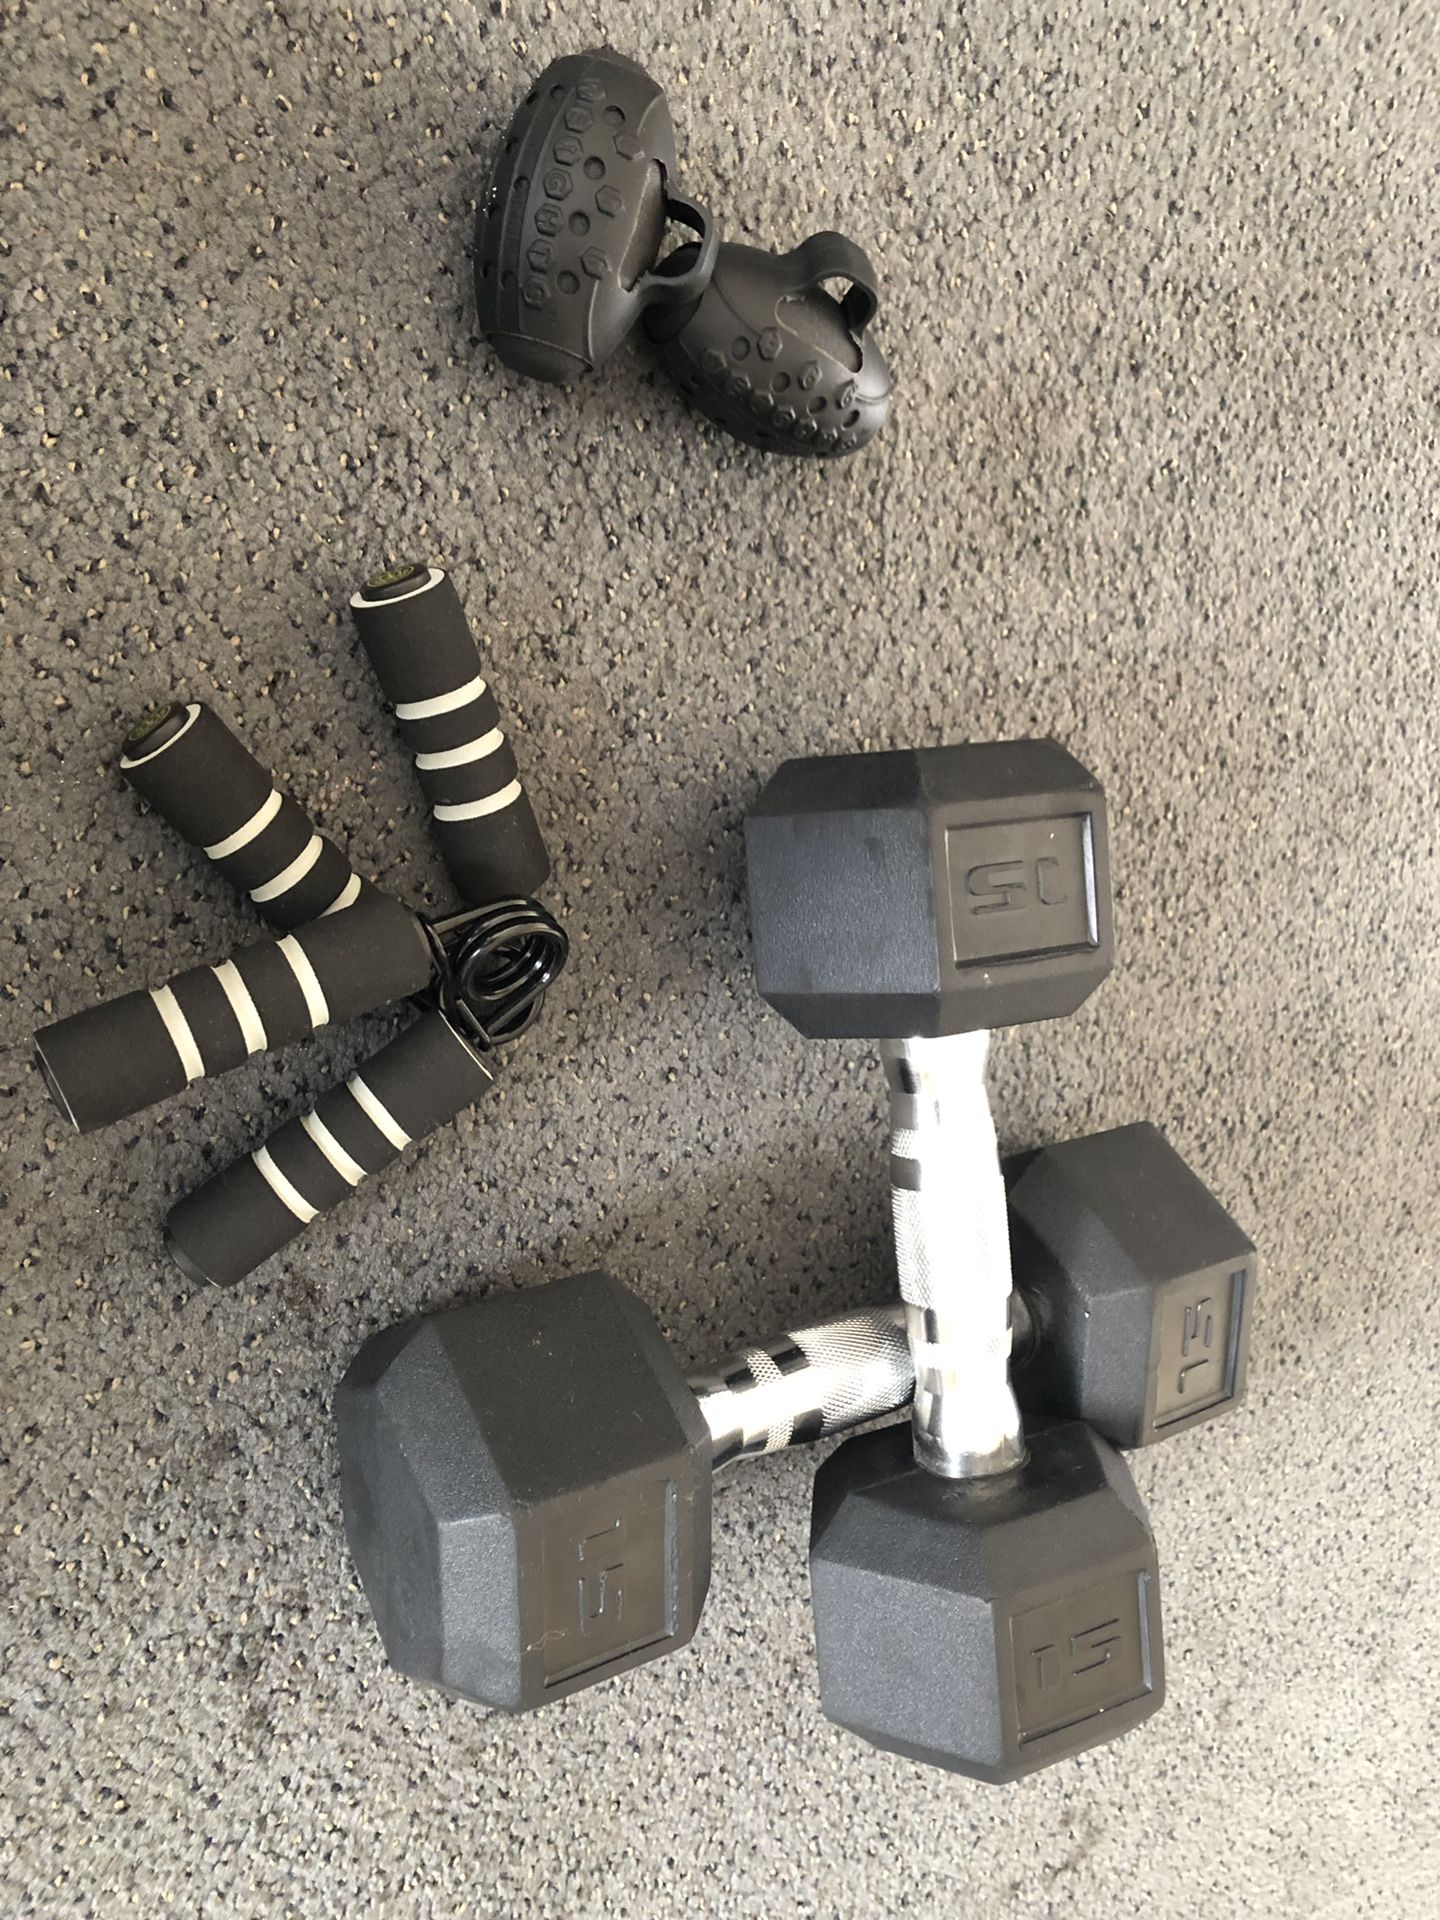 15 pound weights , 1.5 pound egg weights and hand grips.